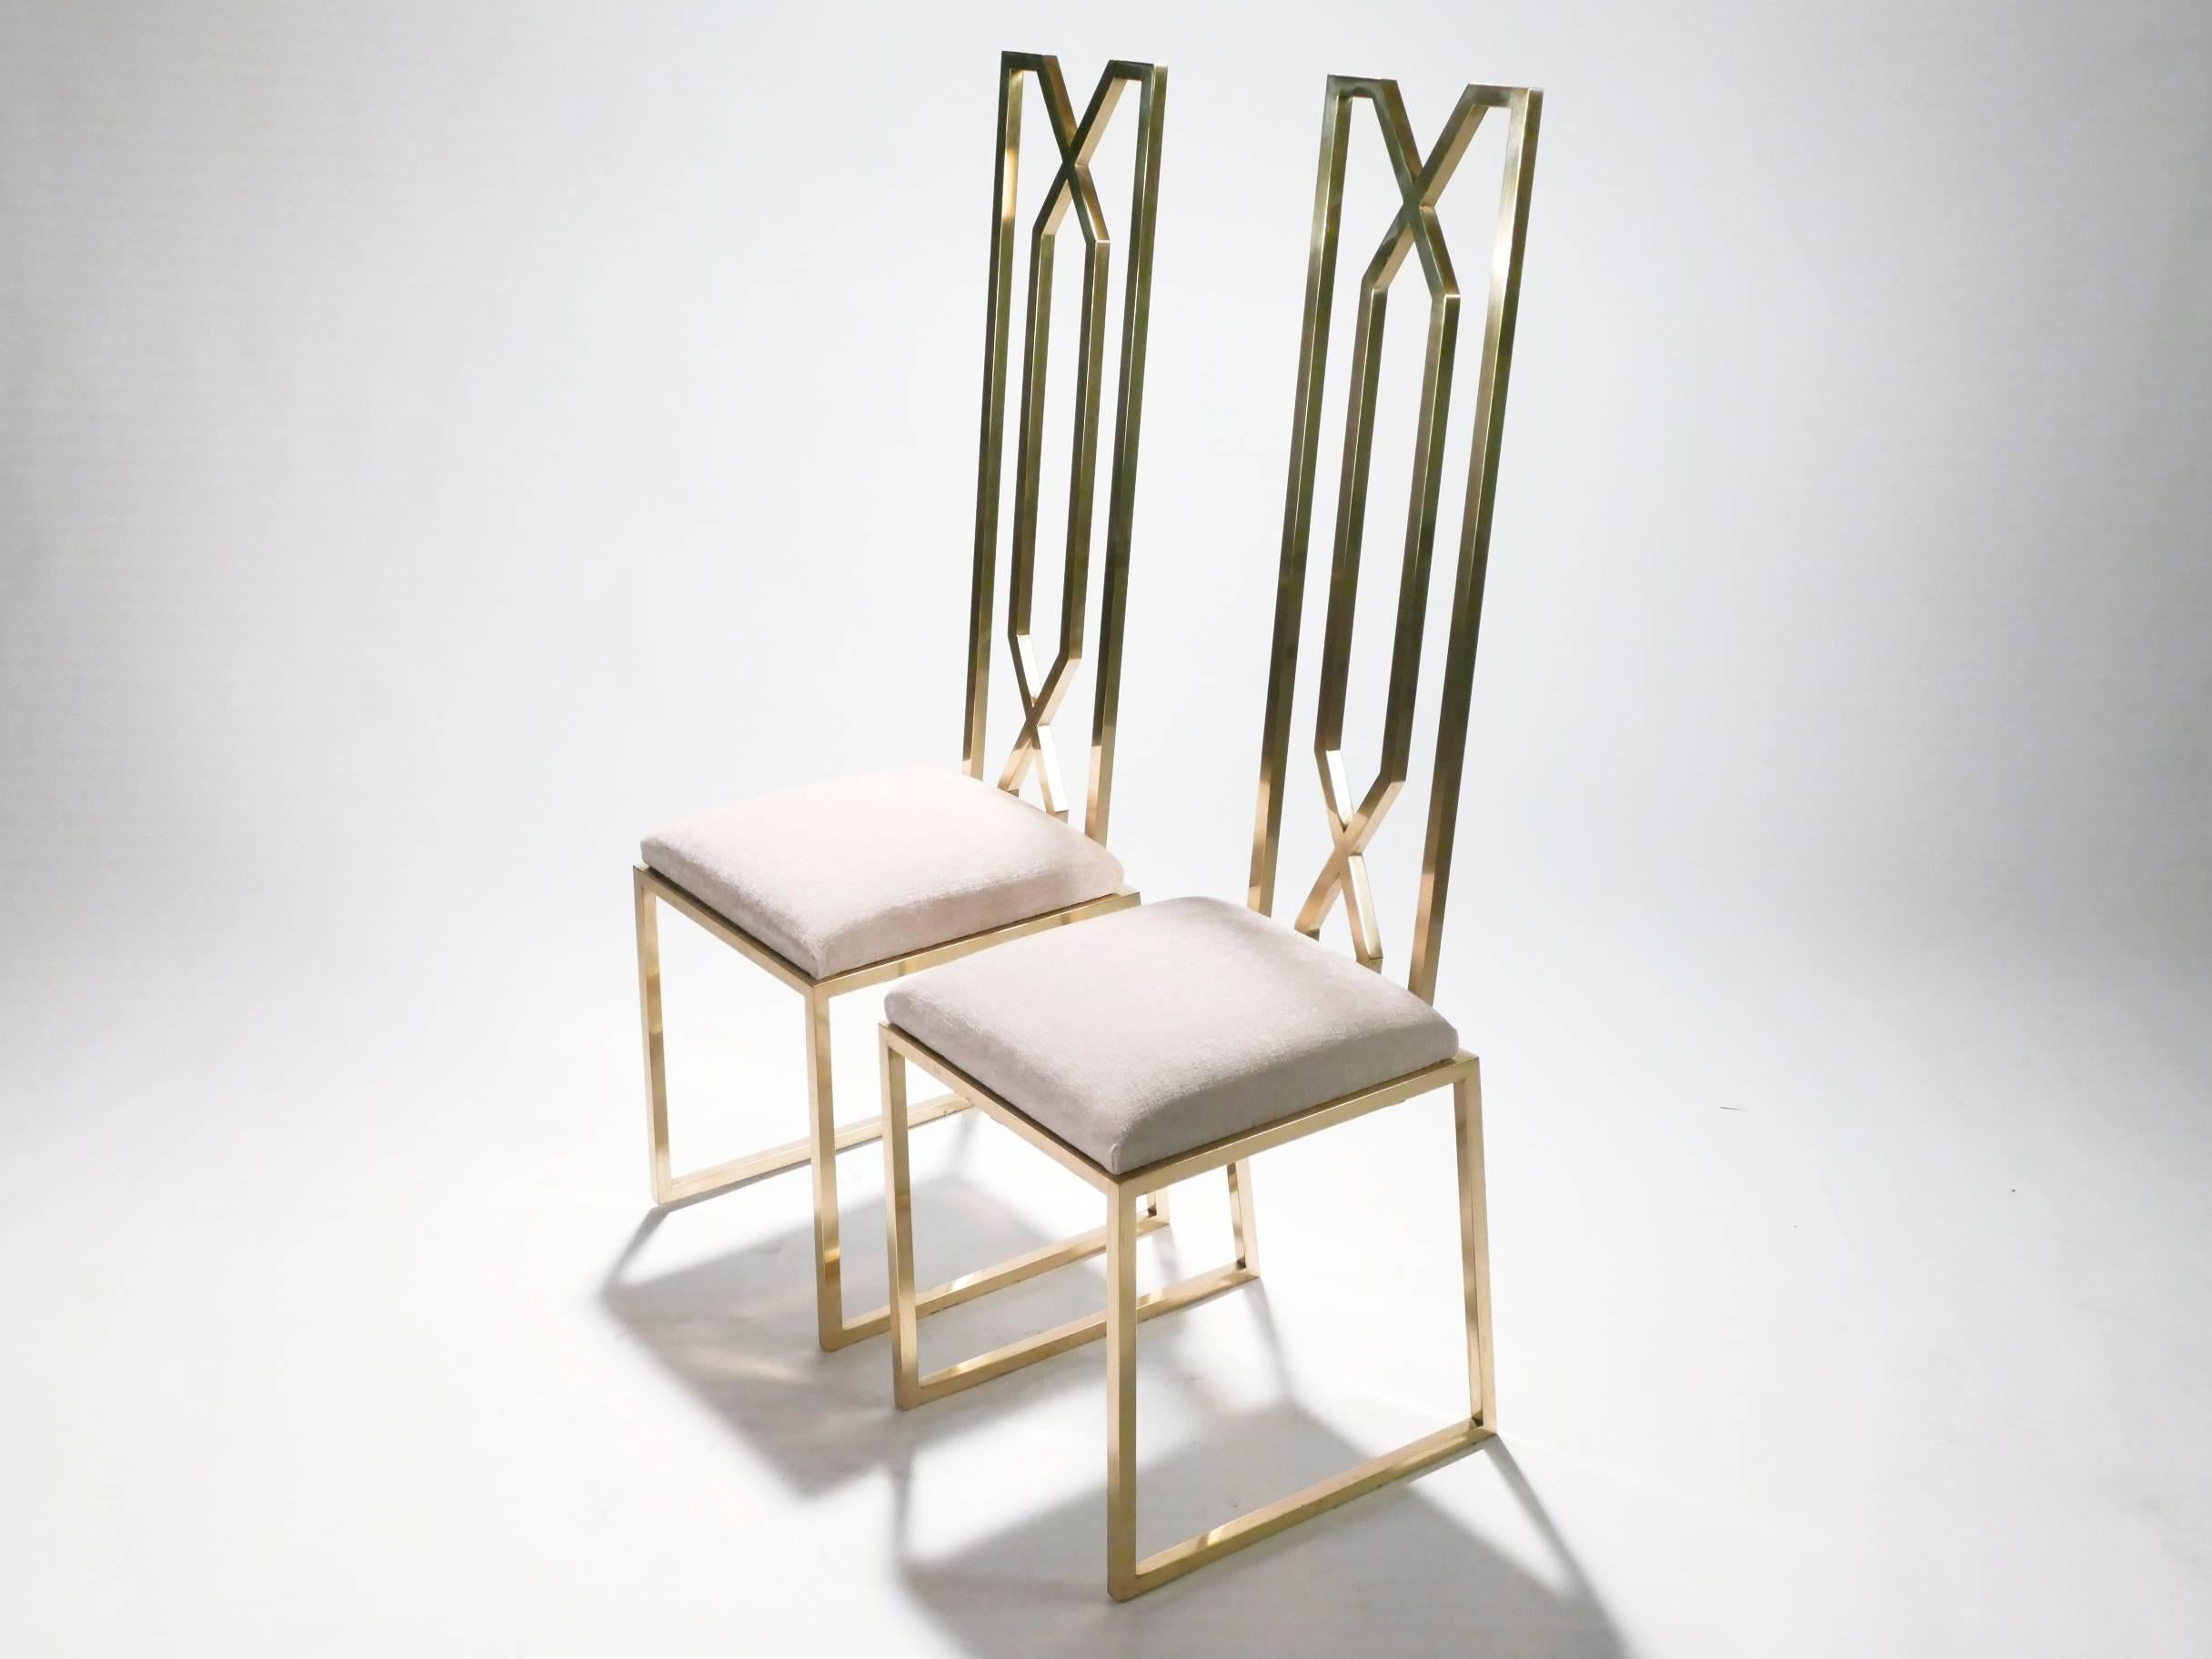 Designer Willy Rizzo’s noble and extravagant tastes are evident in this pair of midcentury chairs. Cool brass is fashioned into an inventive, geometric design that towers high above the newly upholstered, textured cotton seats. The bright brass and